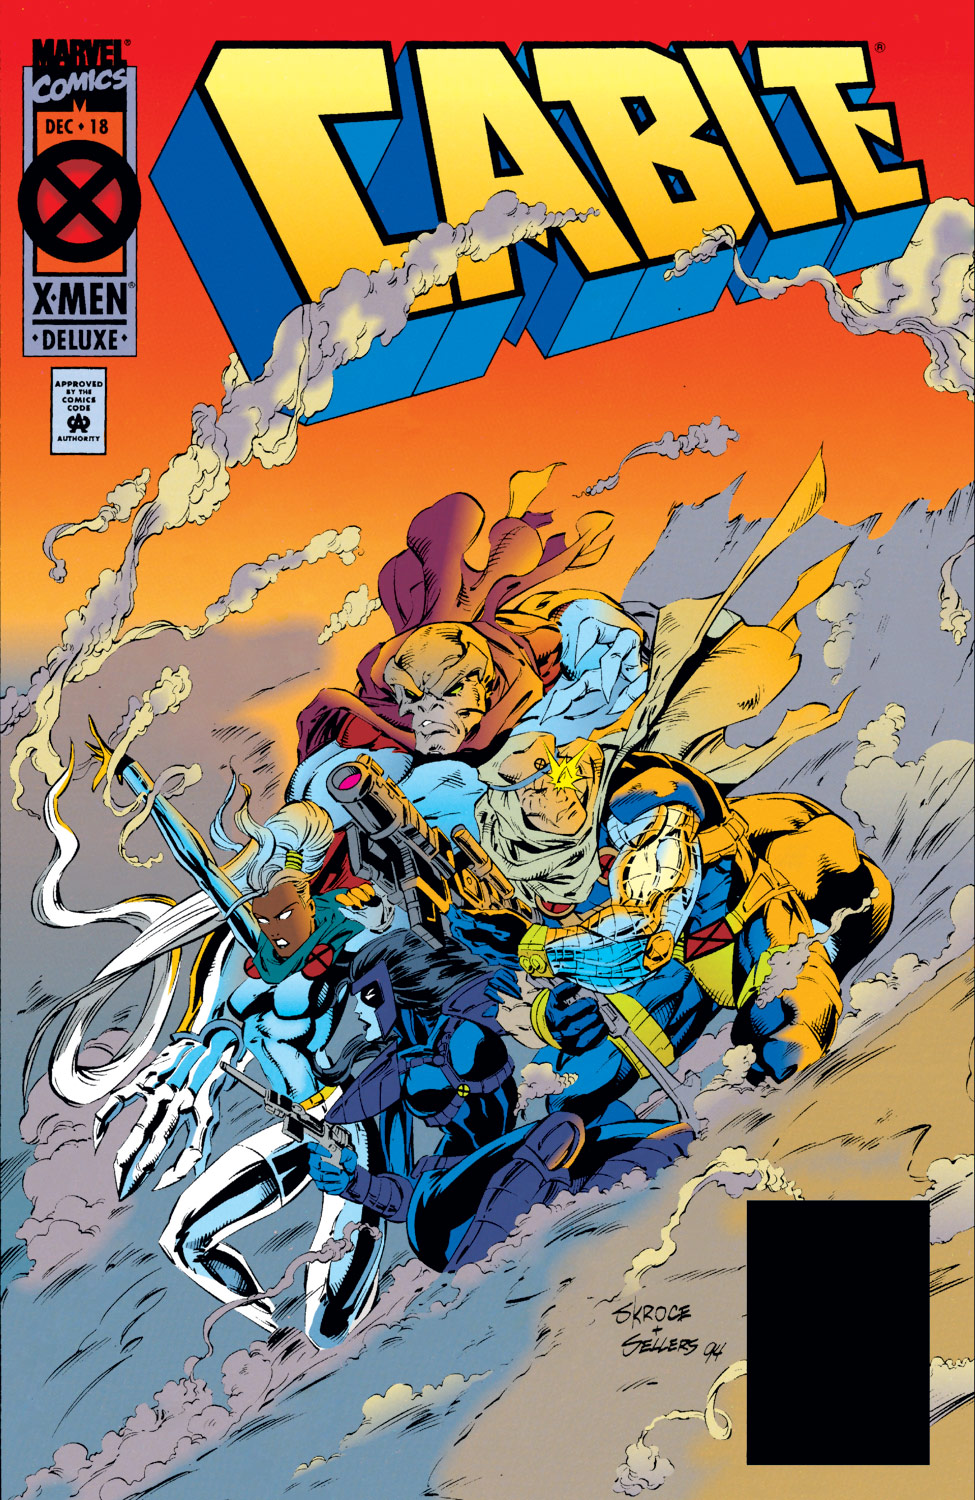 Cable (1993) #18